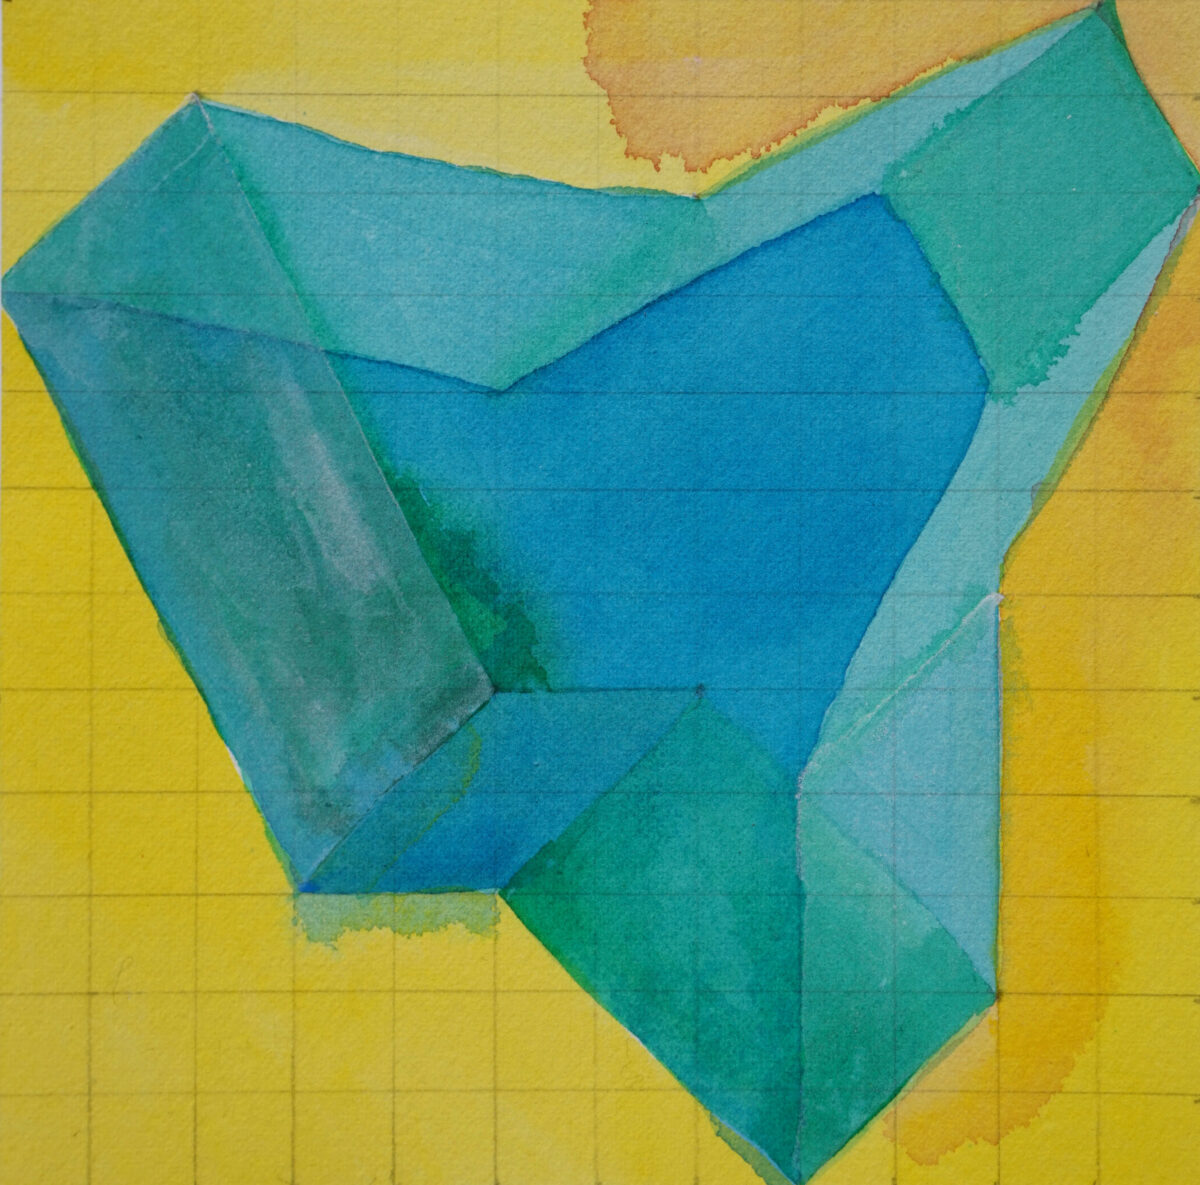 Angular planes enclose a space like strips of paper folded to make a concave polygon with blues that fade into each other in a field that’s yellow but murky.